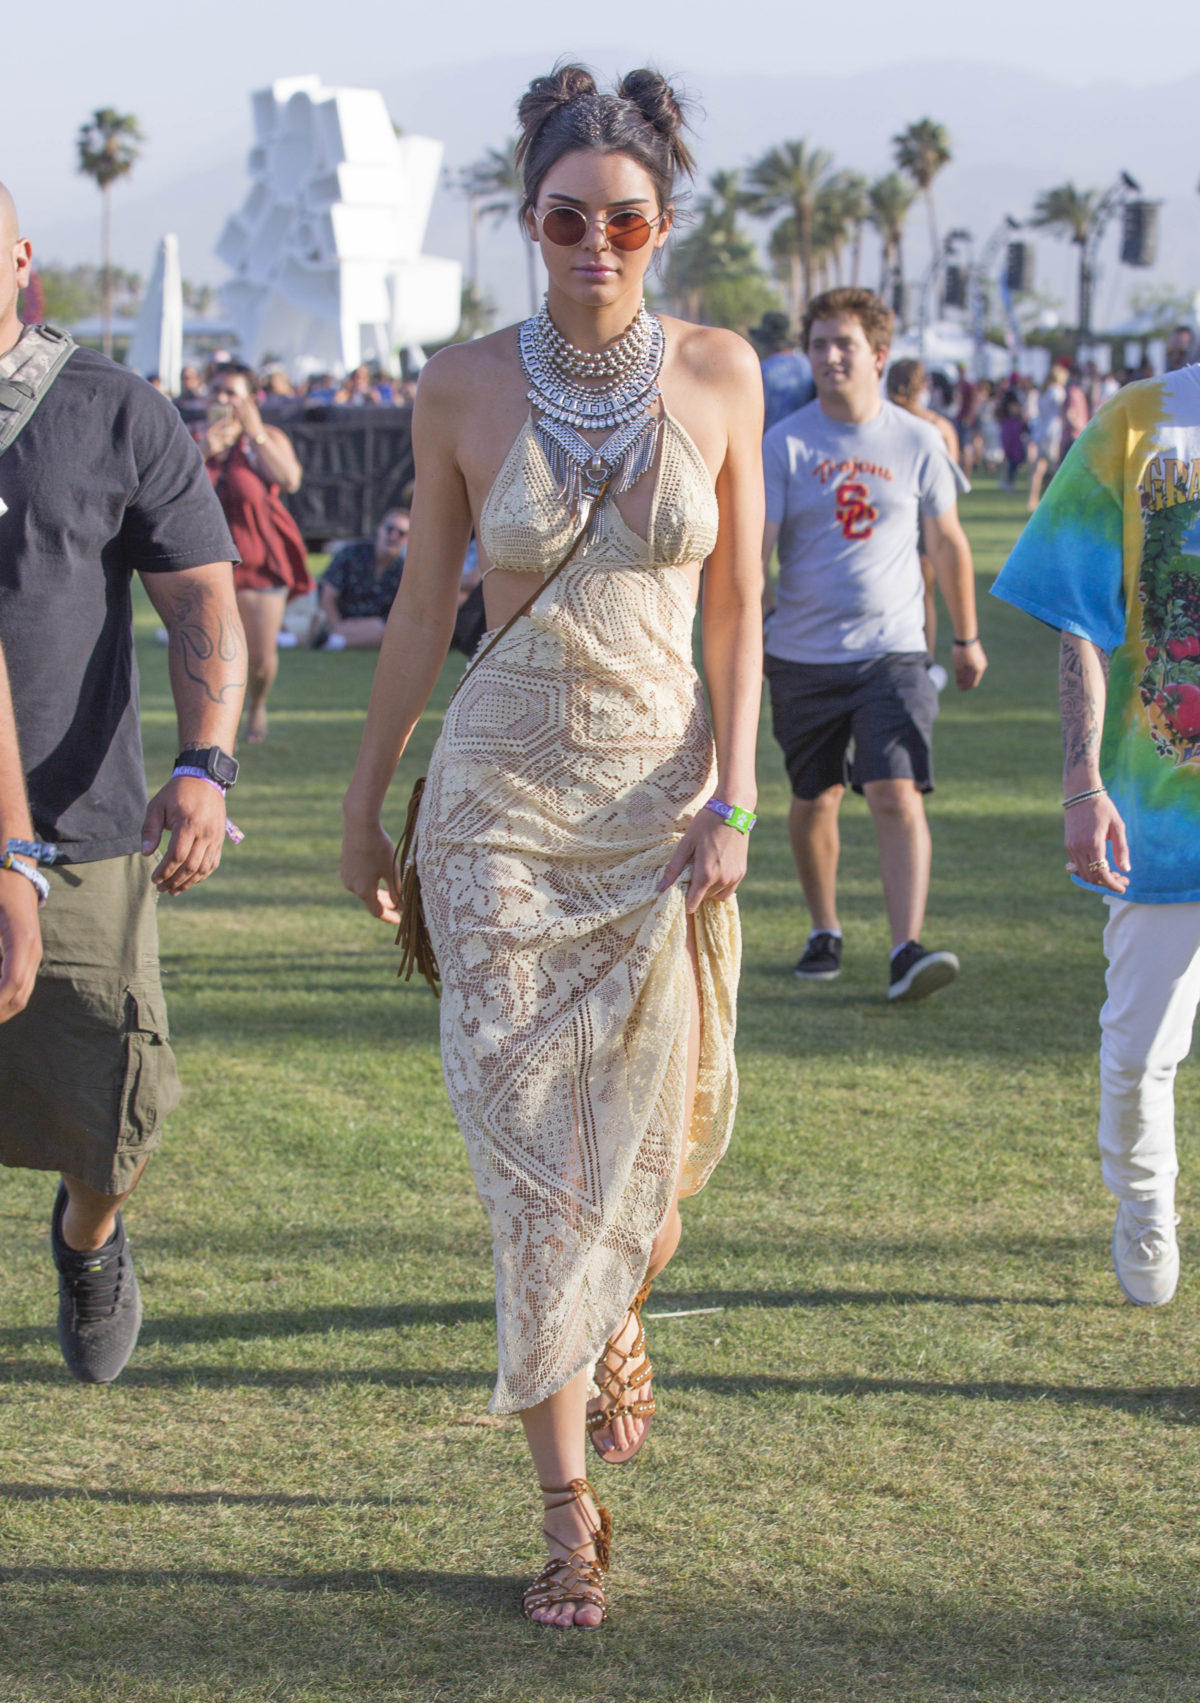 Kendal Jeener Arrive to the Coachella Music Festival in a stunning Beige Lace Dress in Indio California